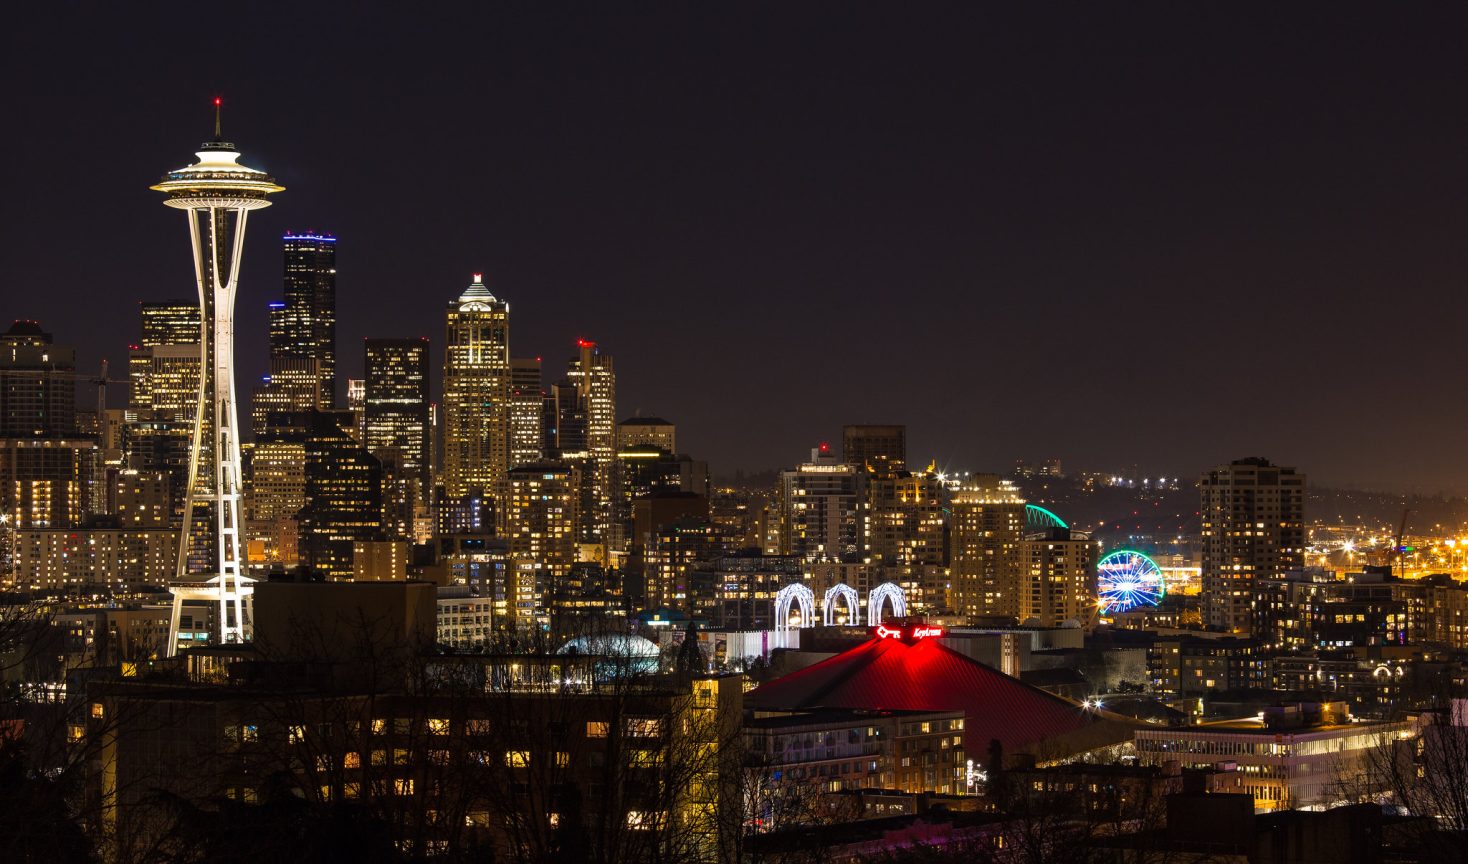 Human achievements, such as a nighttime view of the Seattle downtown, can elicit awe.